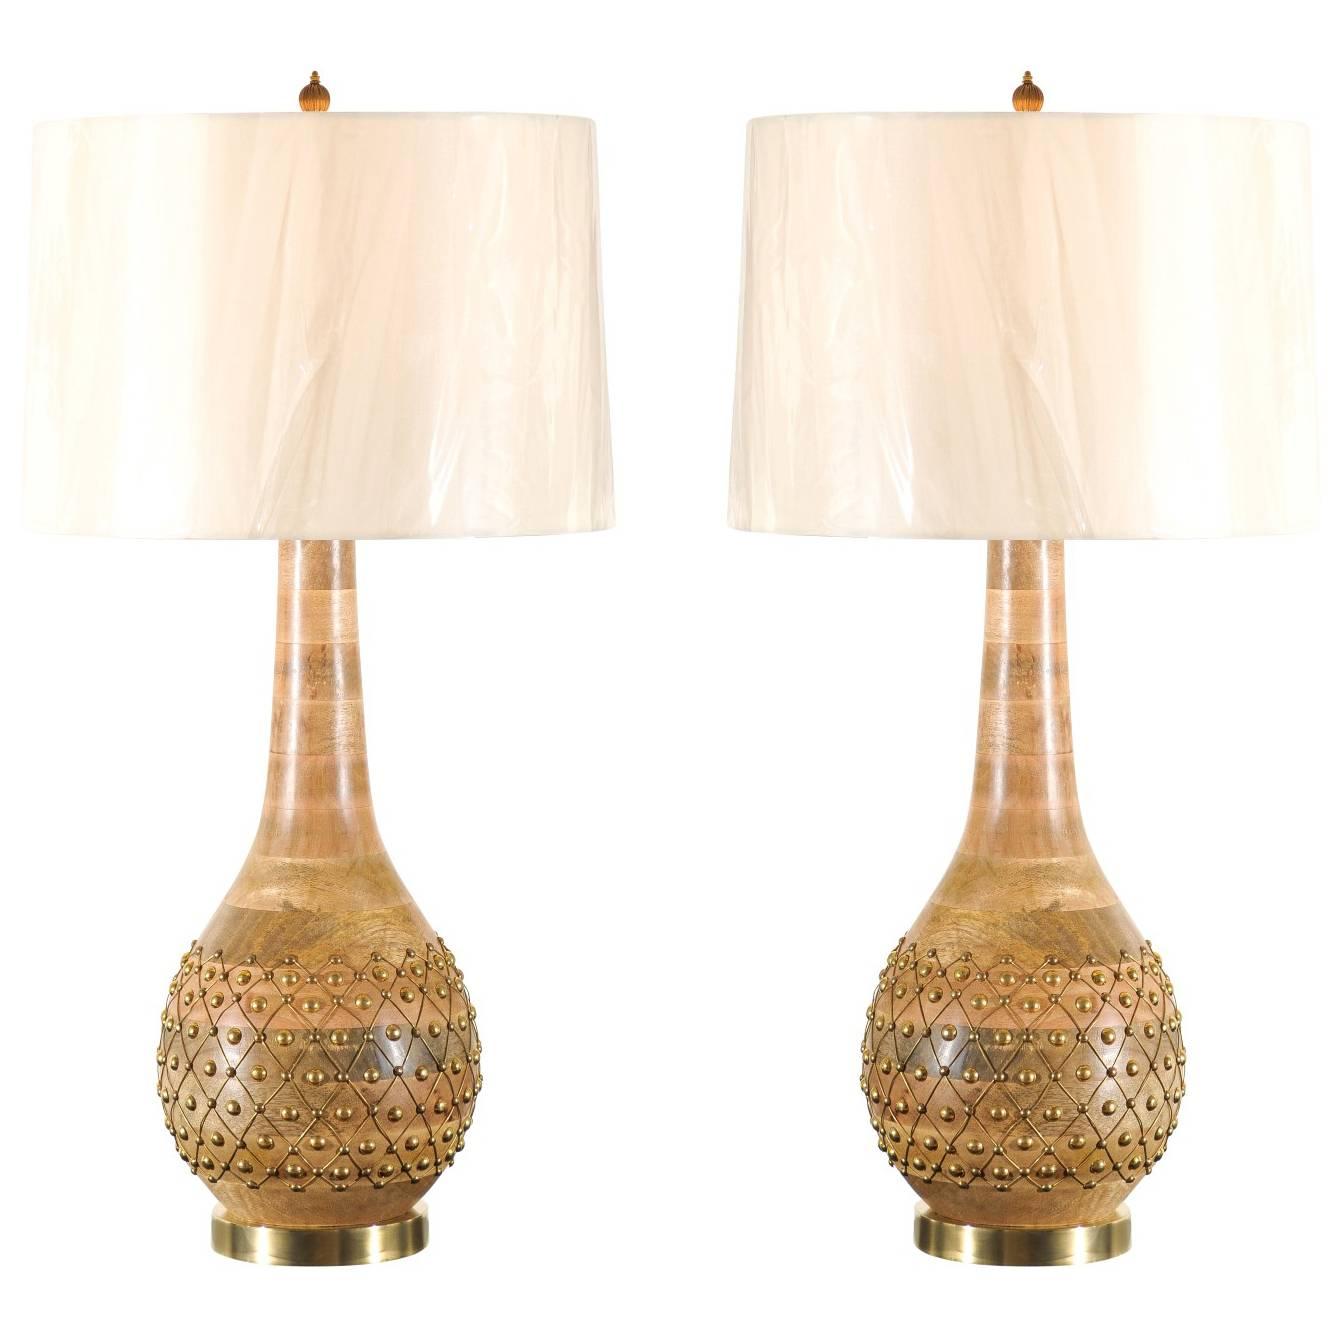 Exquisite Pair of Handmade Brass Studded Gourd Vessels as Custom Lamps For Sale